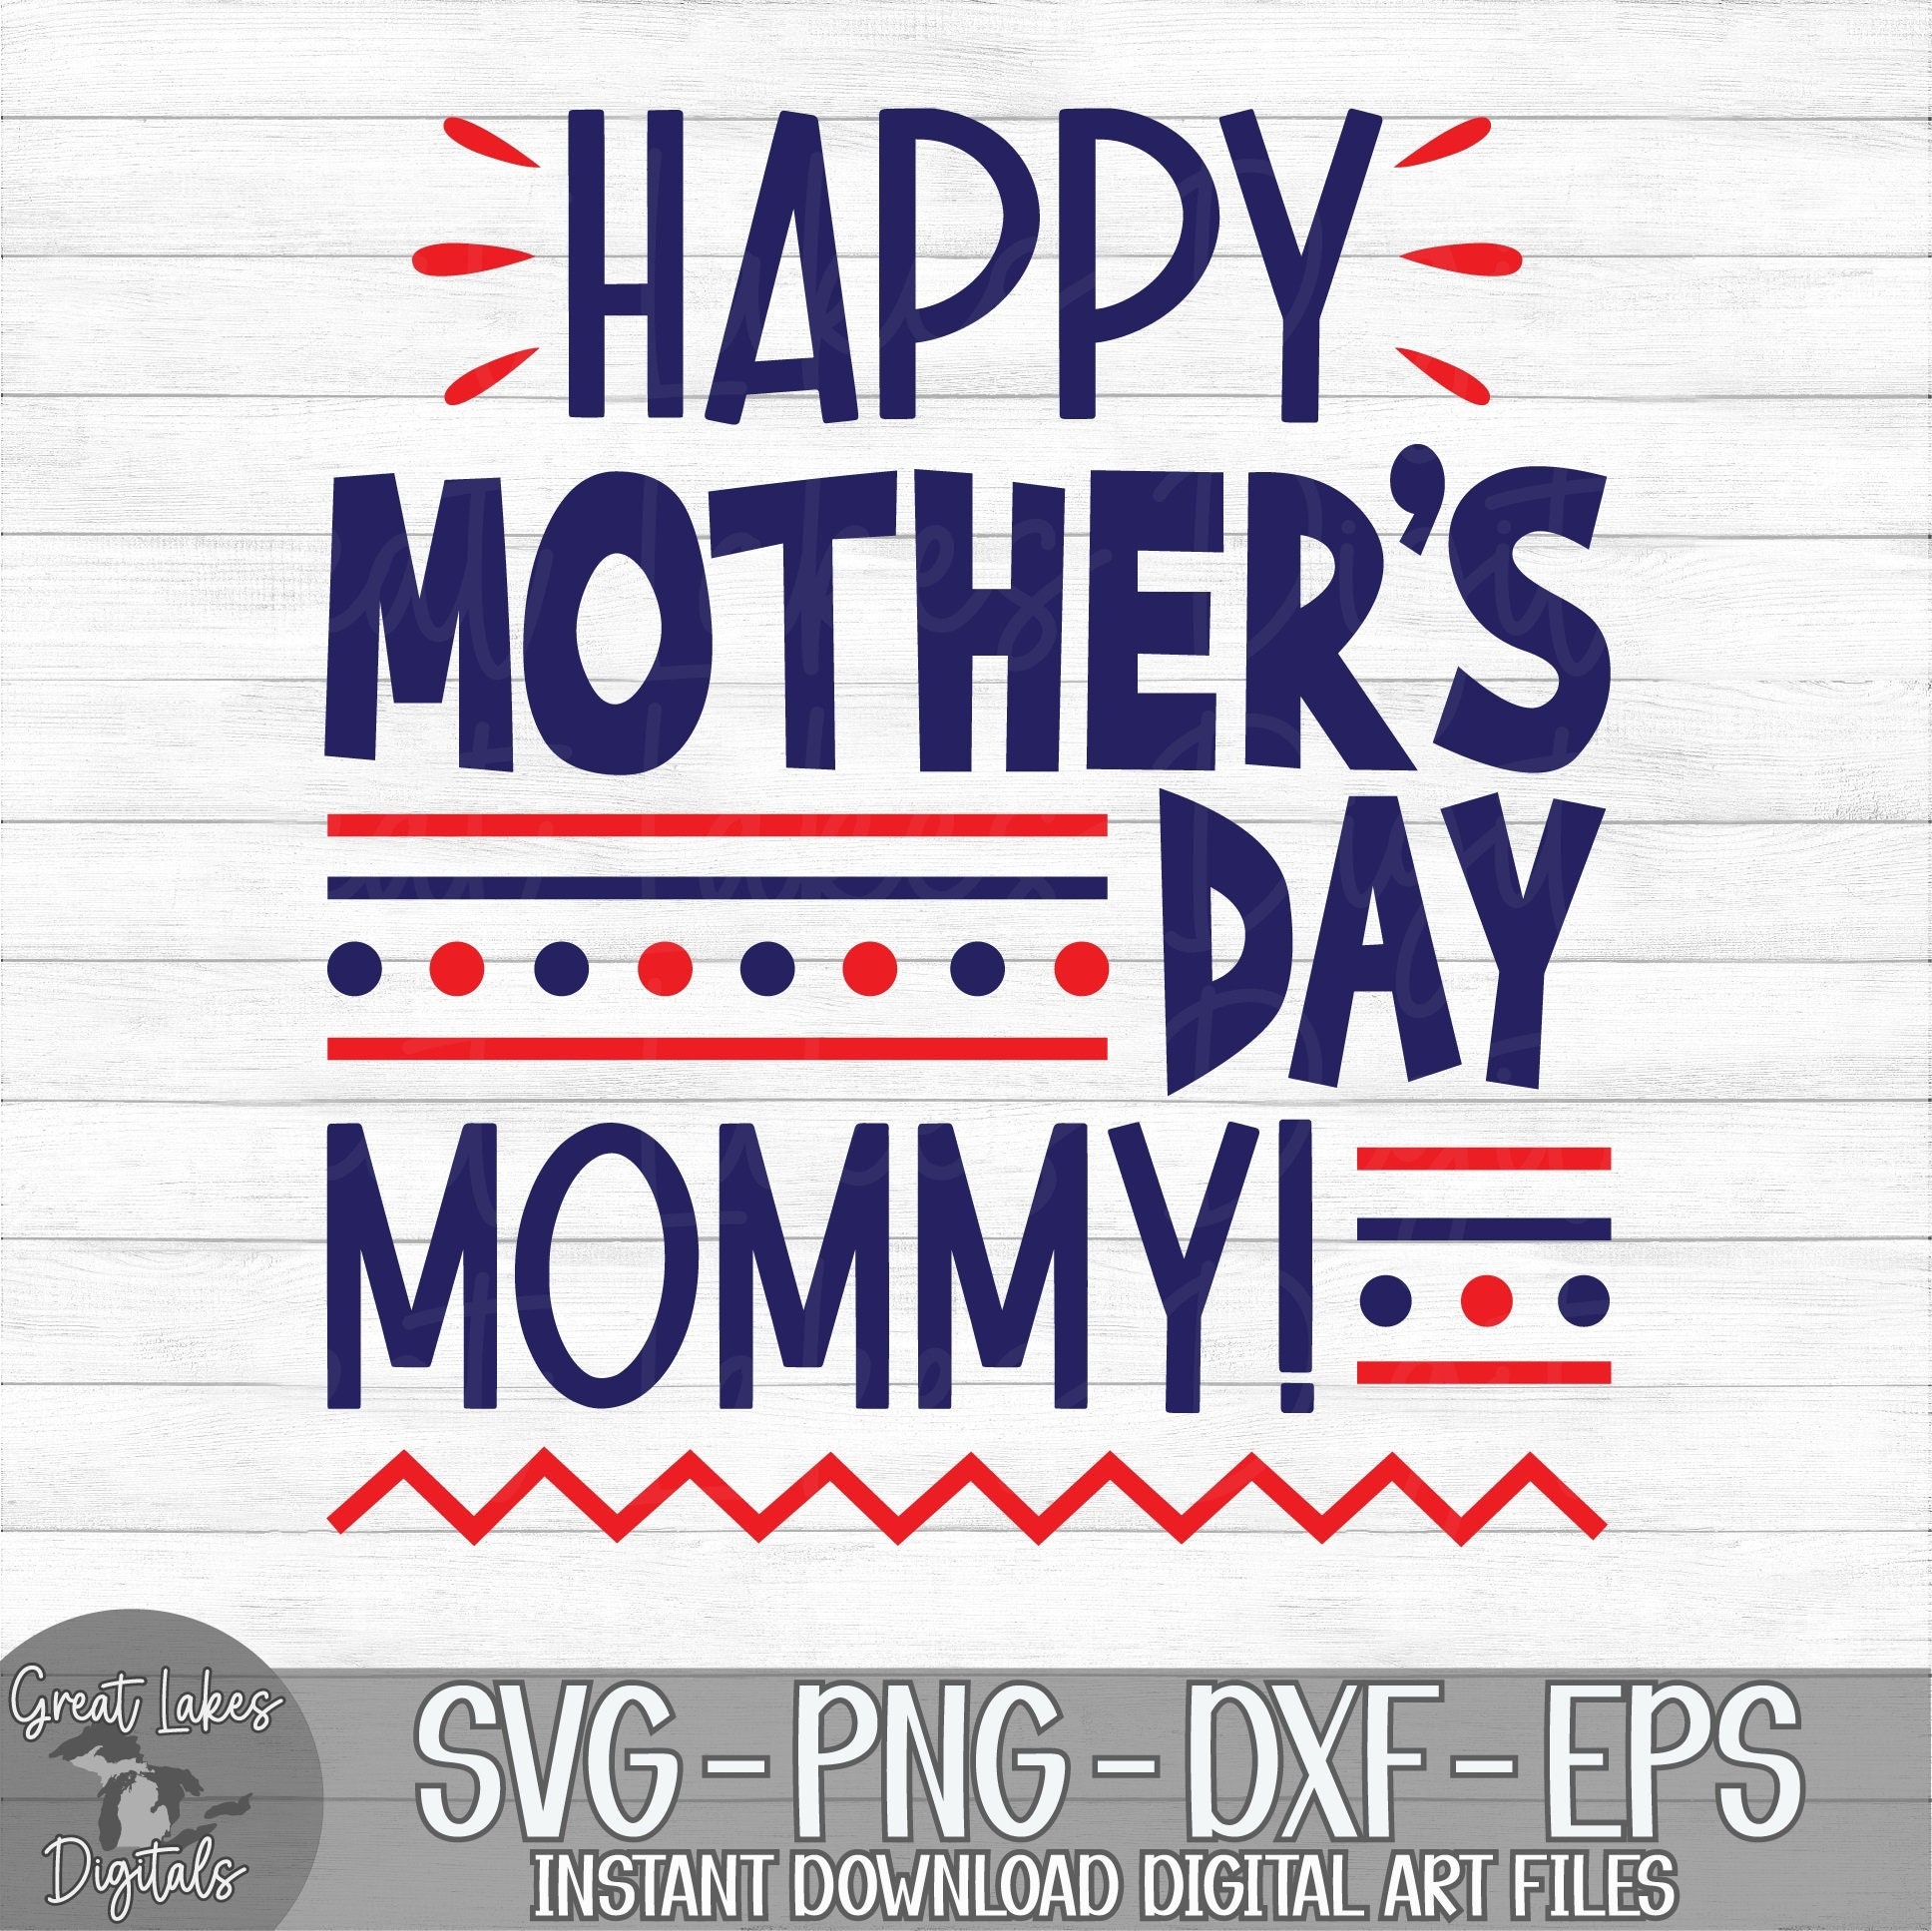 Happy Mother's Day Mommy Instant Digital Download Svg, Png, Dxf, and Eps  Files Included Boy, Navy Blue & Red 